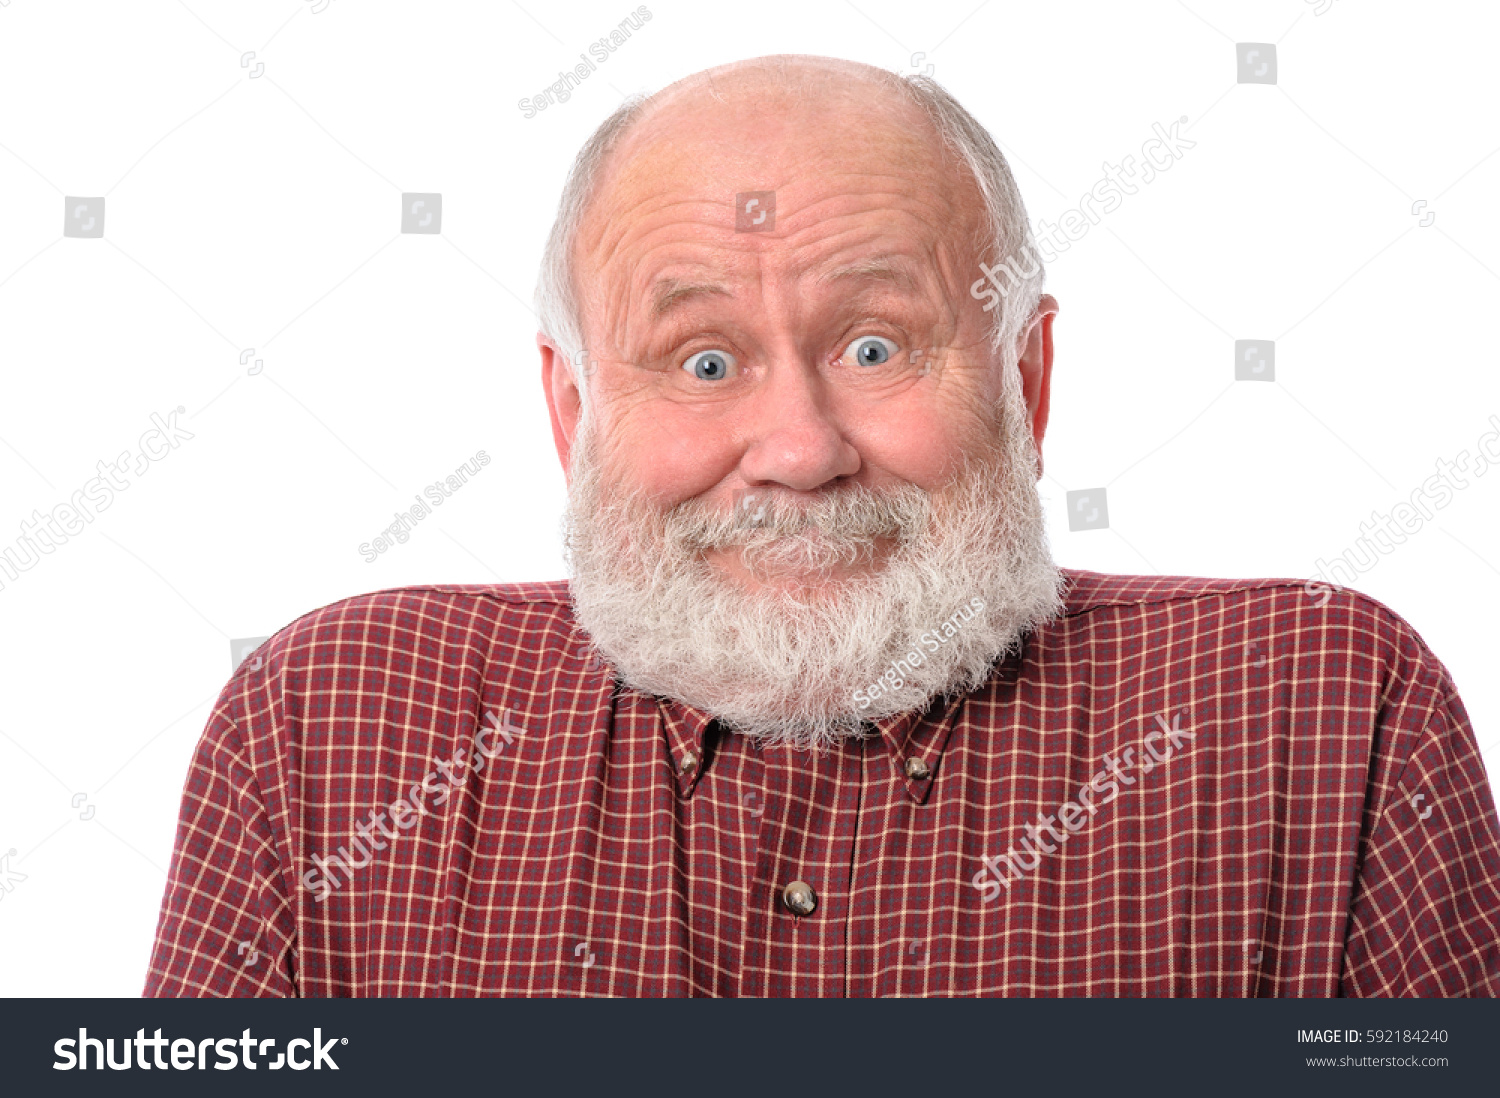 stock-photo-handsome-bald-and-bearded-senior-man-shows-surprised-smile-grimace-or-facial-expre...jpg